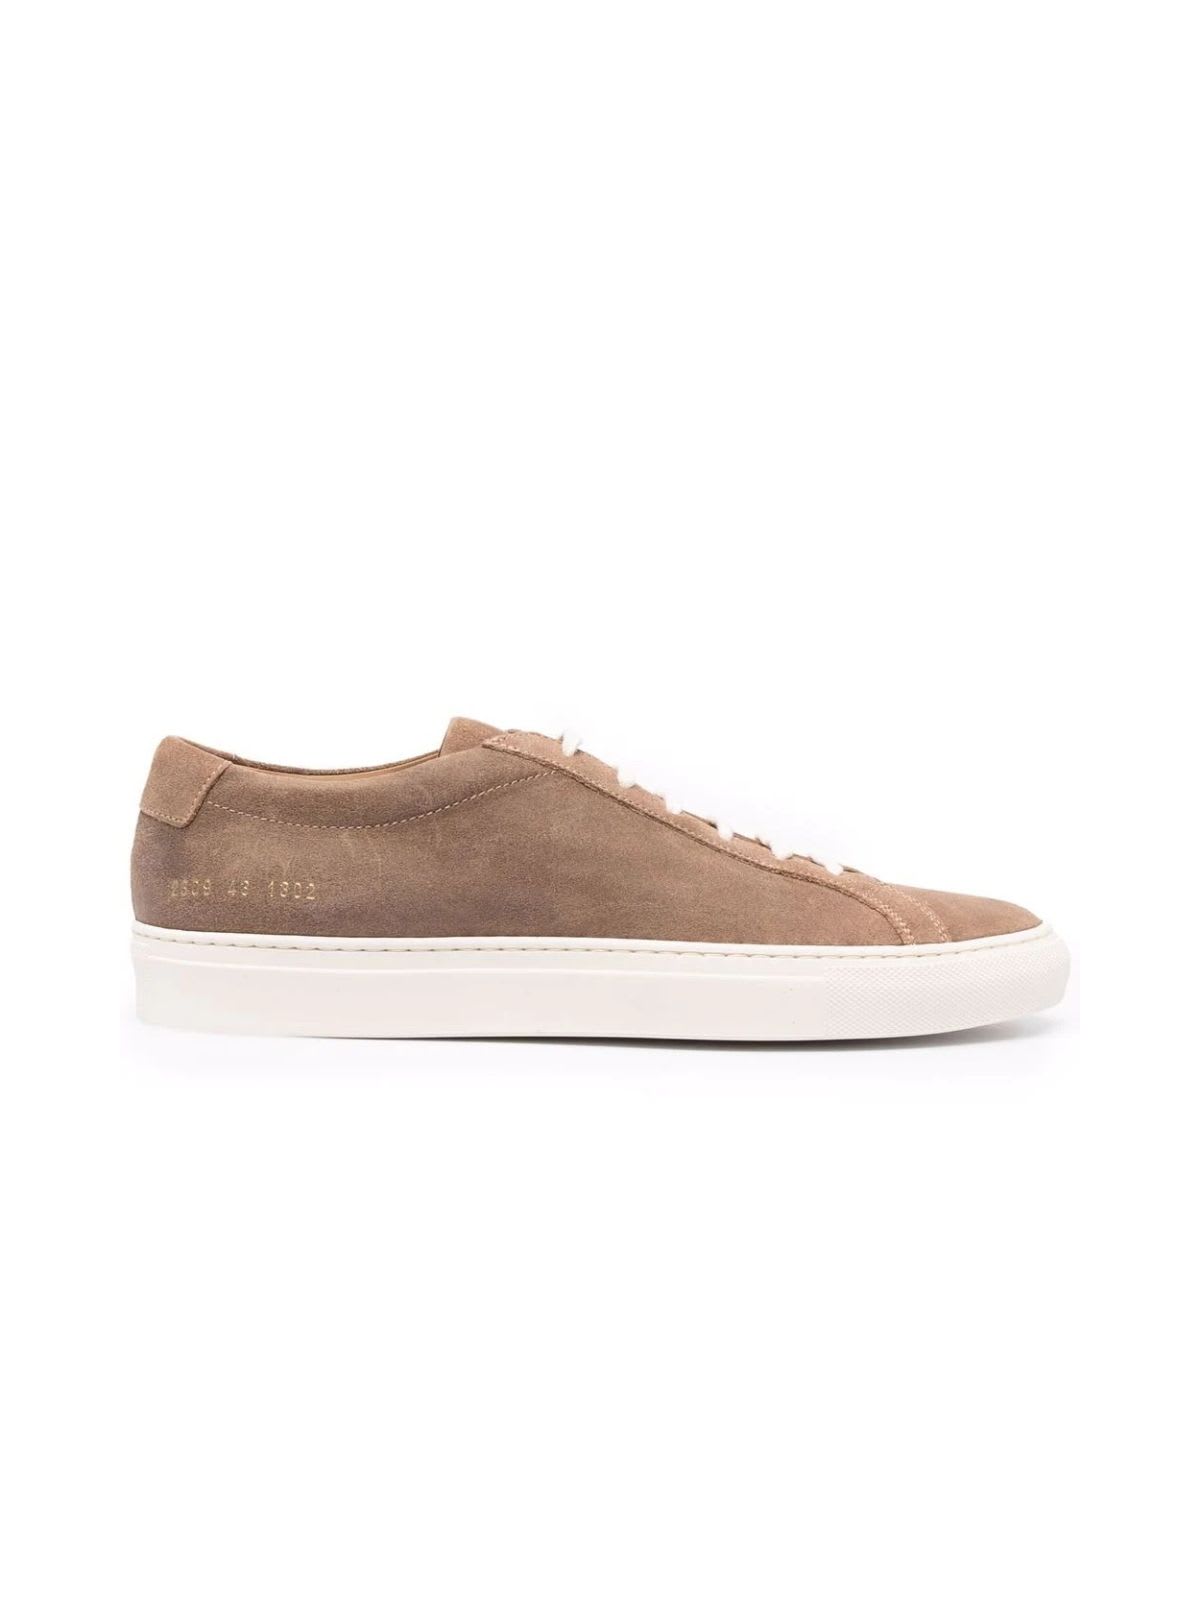 Common Projects Sneaker Waxed Suede Upper Contrast Cotton Laces And Stitch Reinforced Flassa Sole Gold Foil Article Stamp At Heel Counter